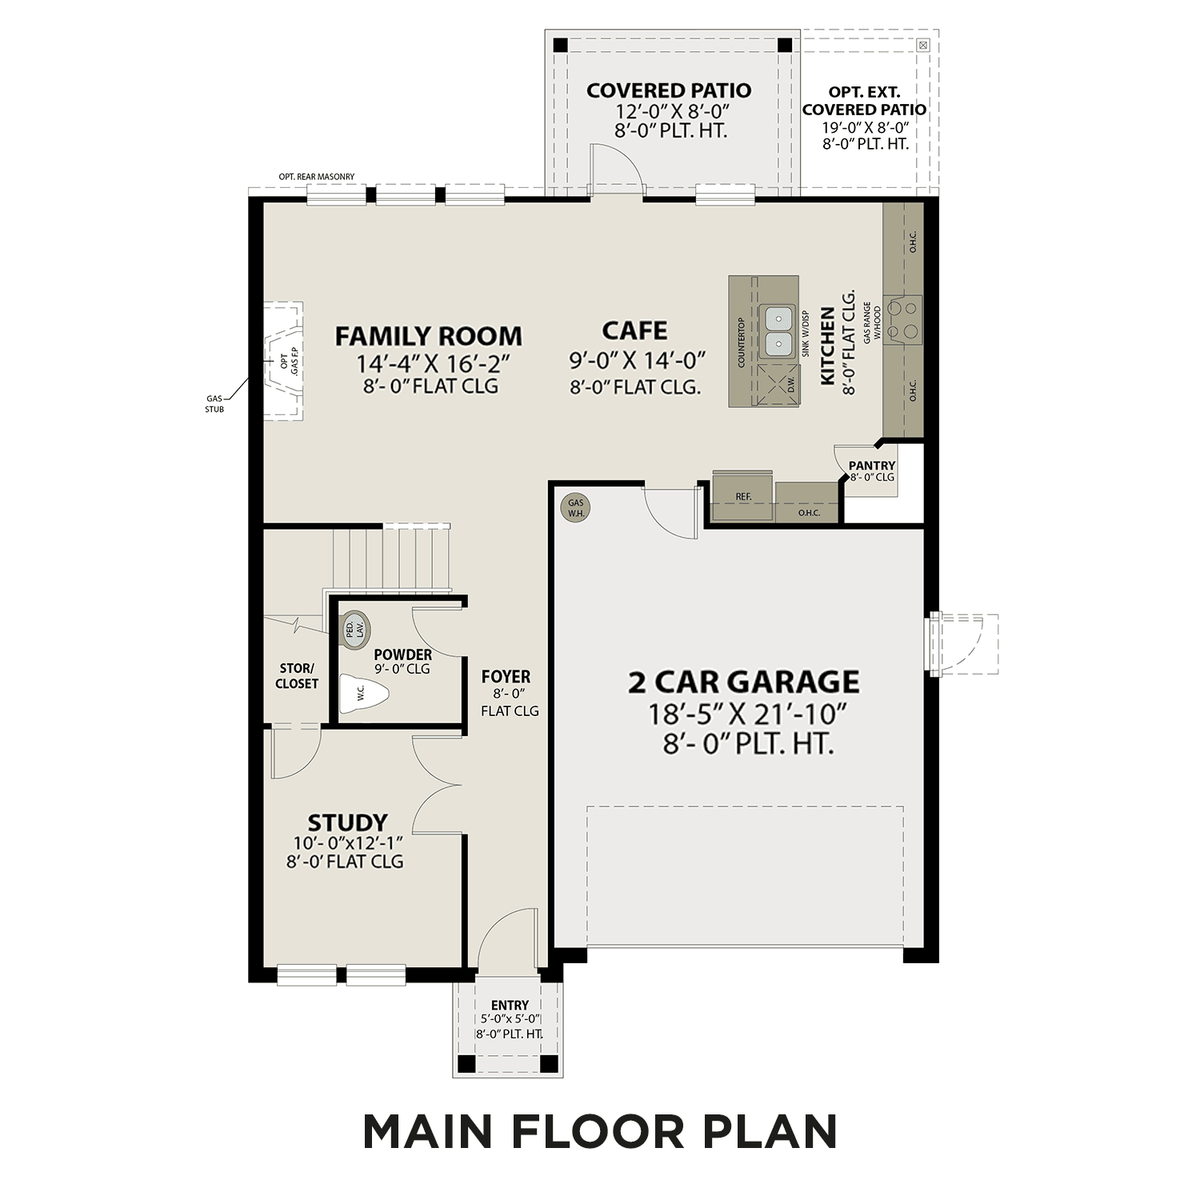 1 - The Solara A buildable floor plan layout in Davidson Homes' Lago Mar community.